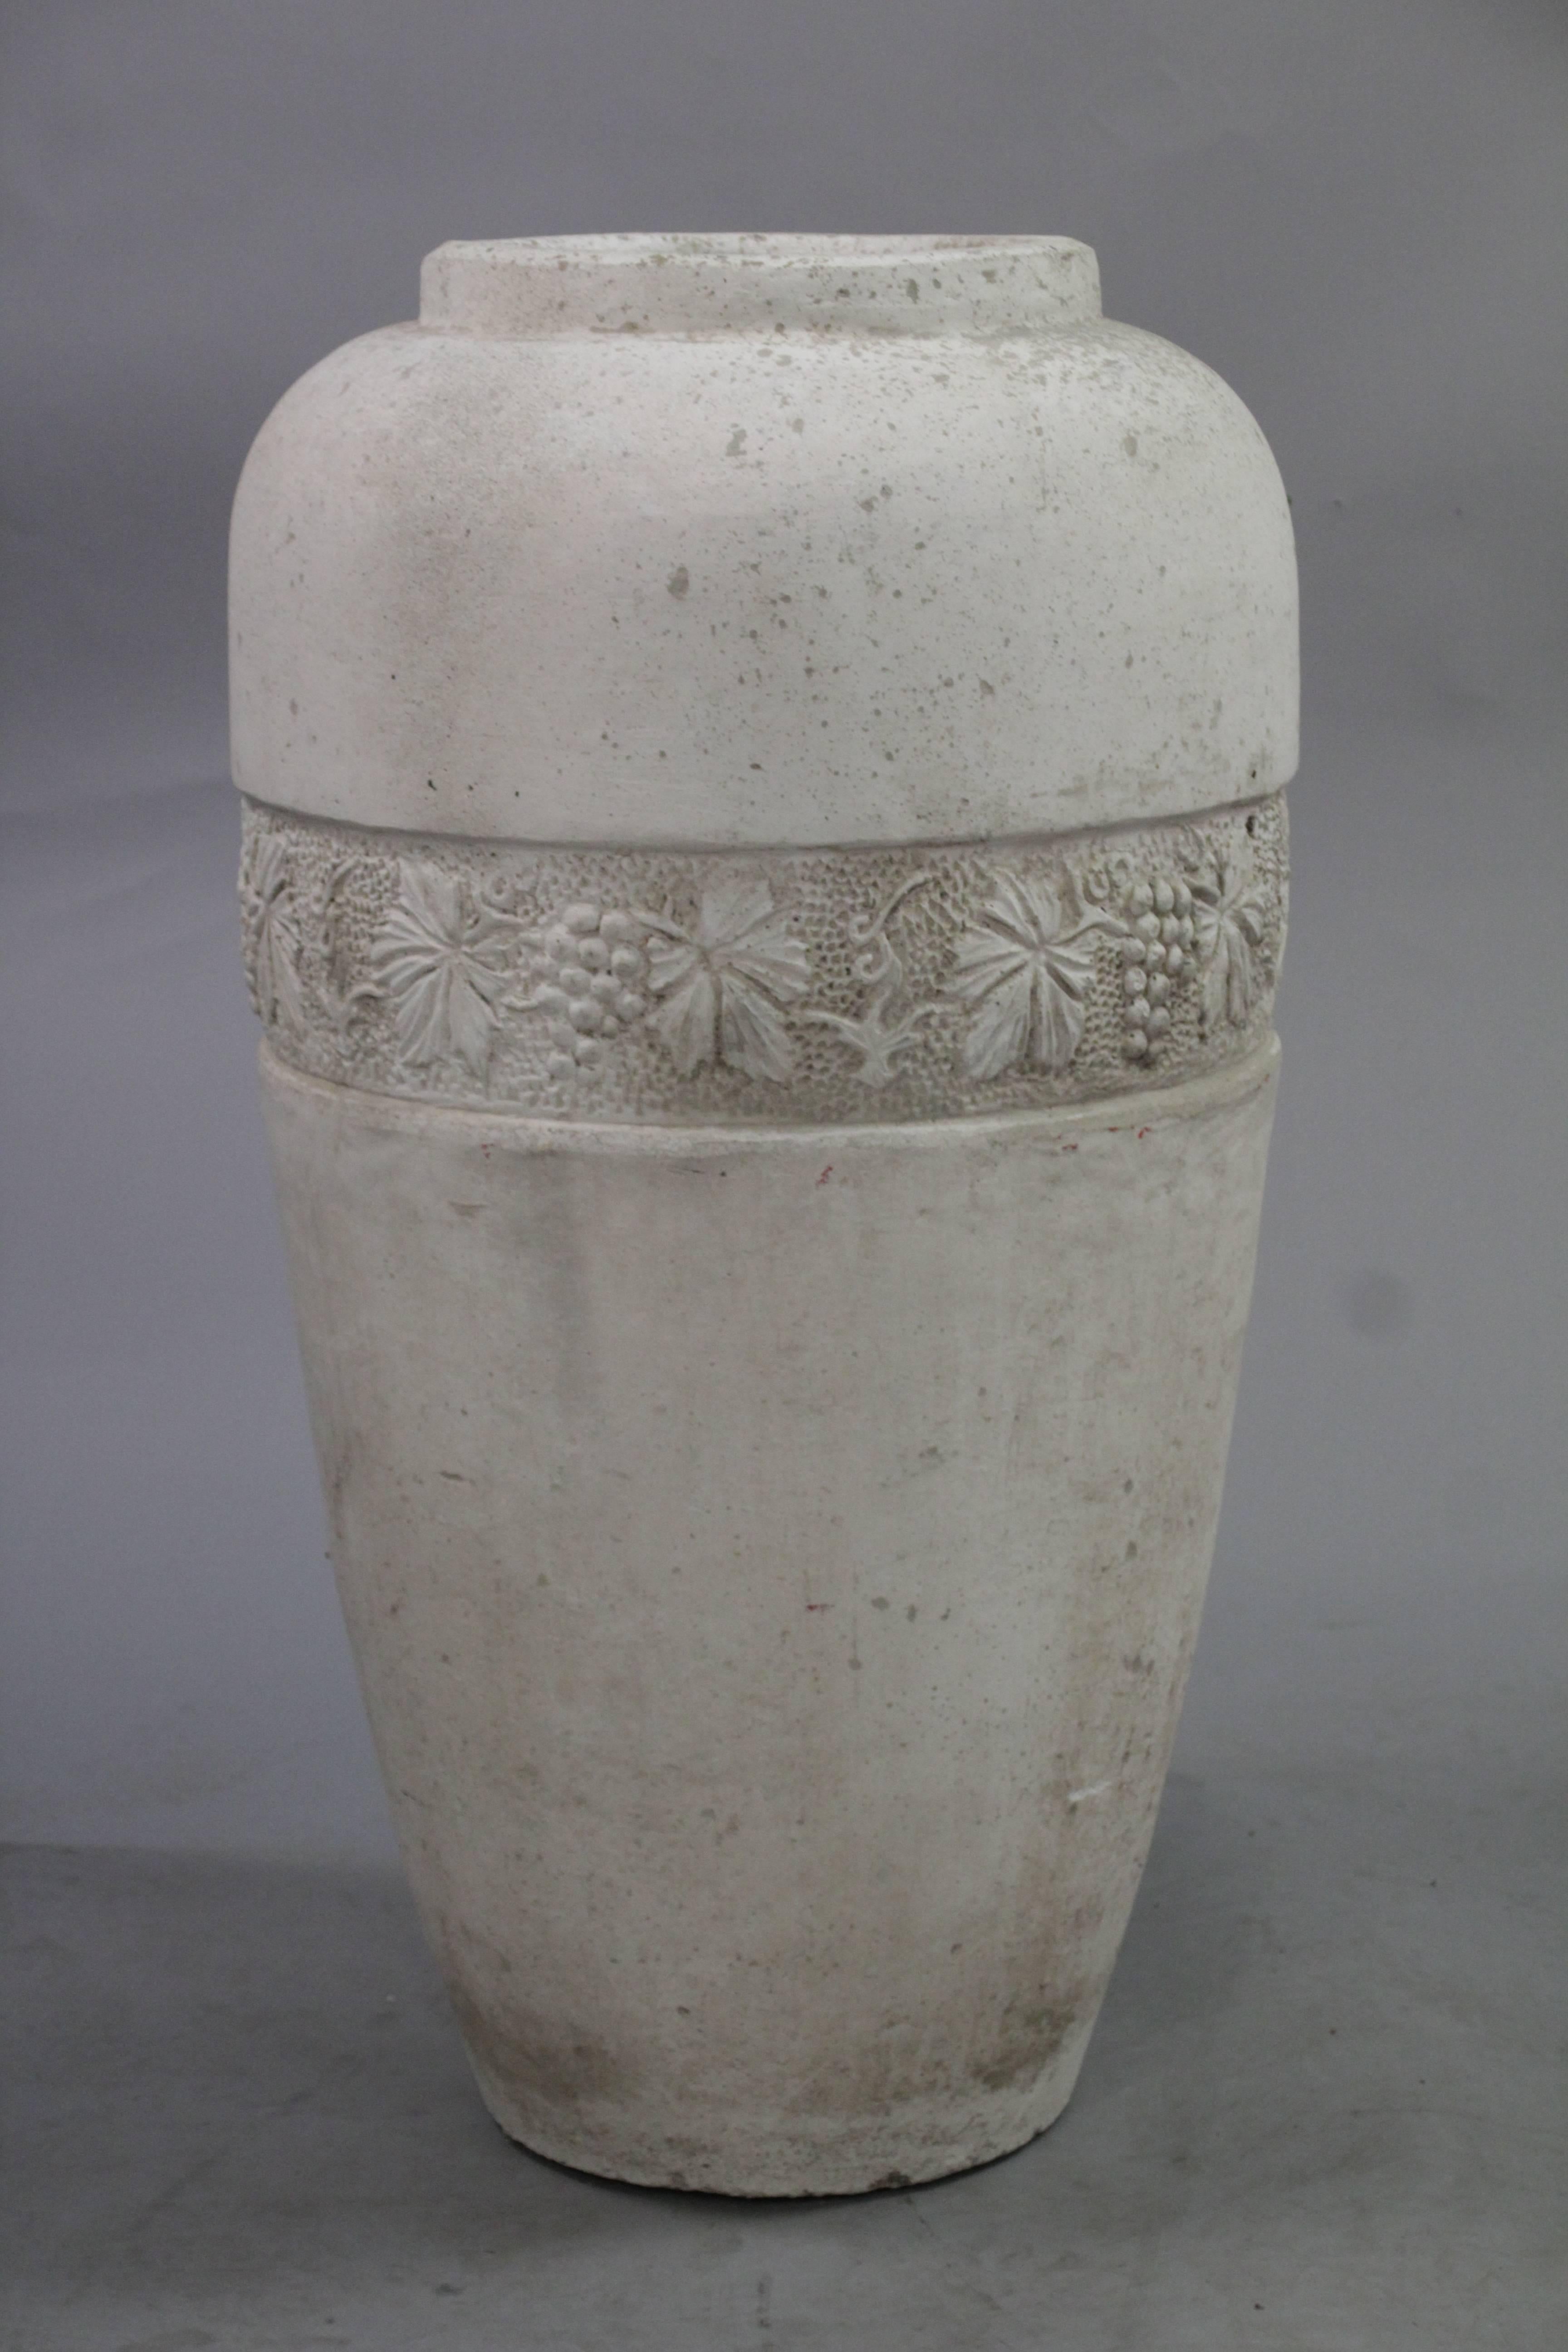 1920s concrete vase wrapped in a detailed grapevine pattern.
     